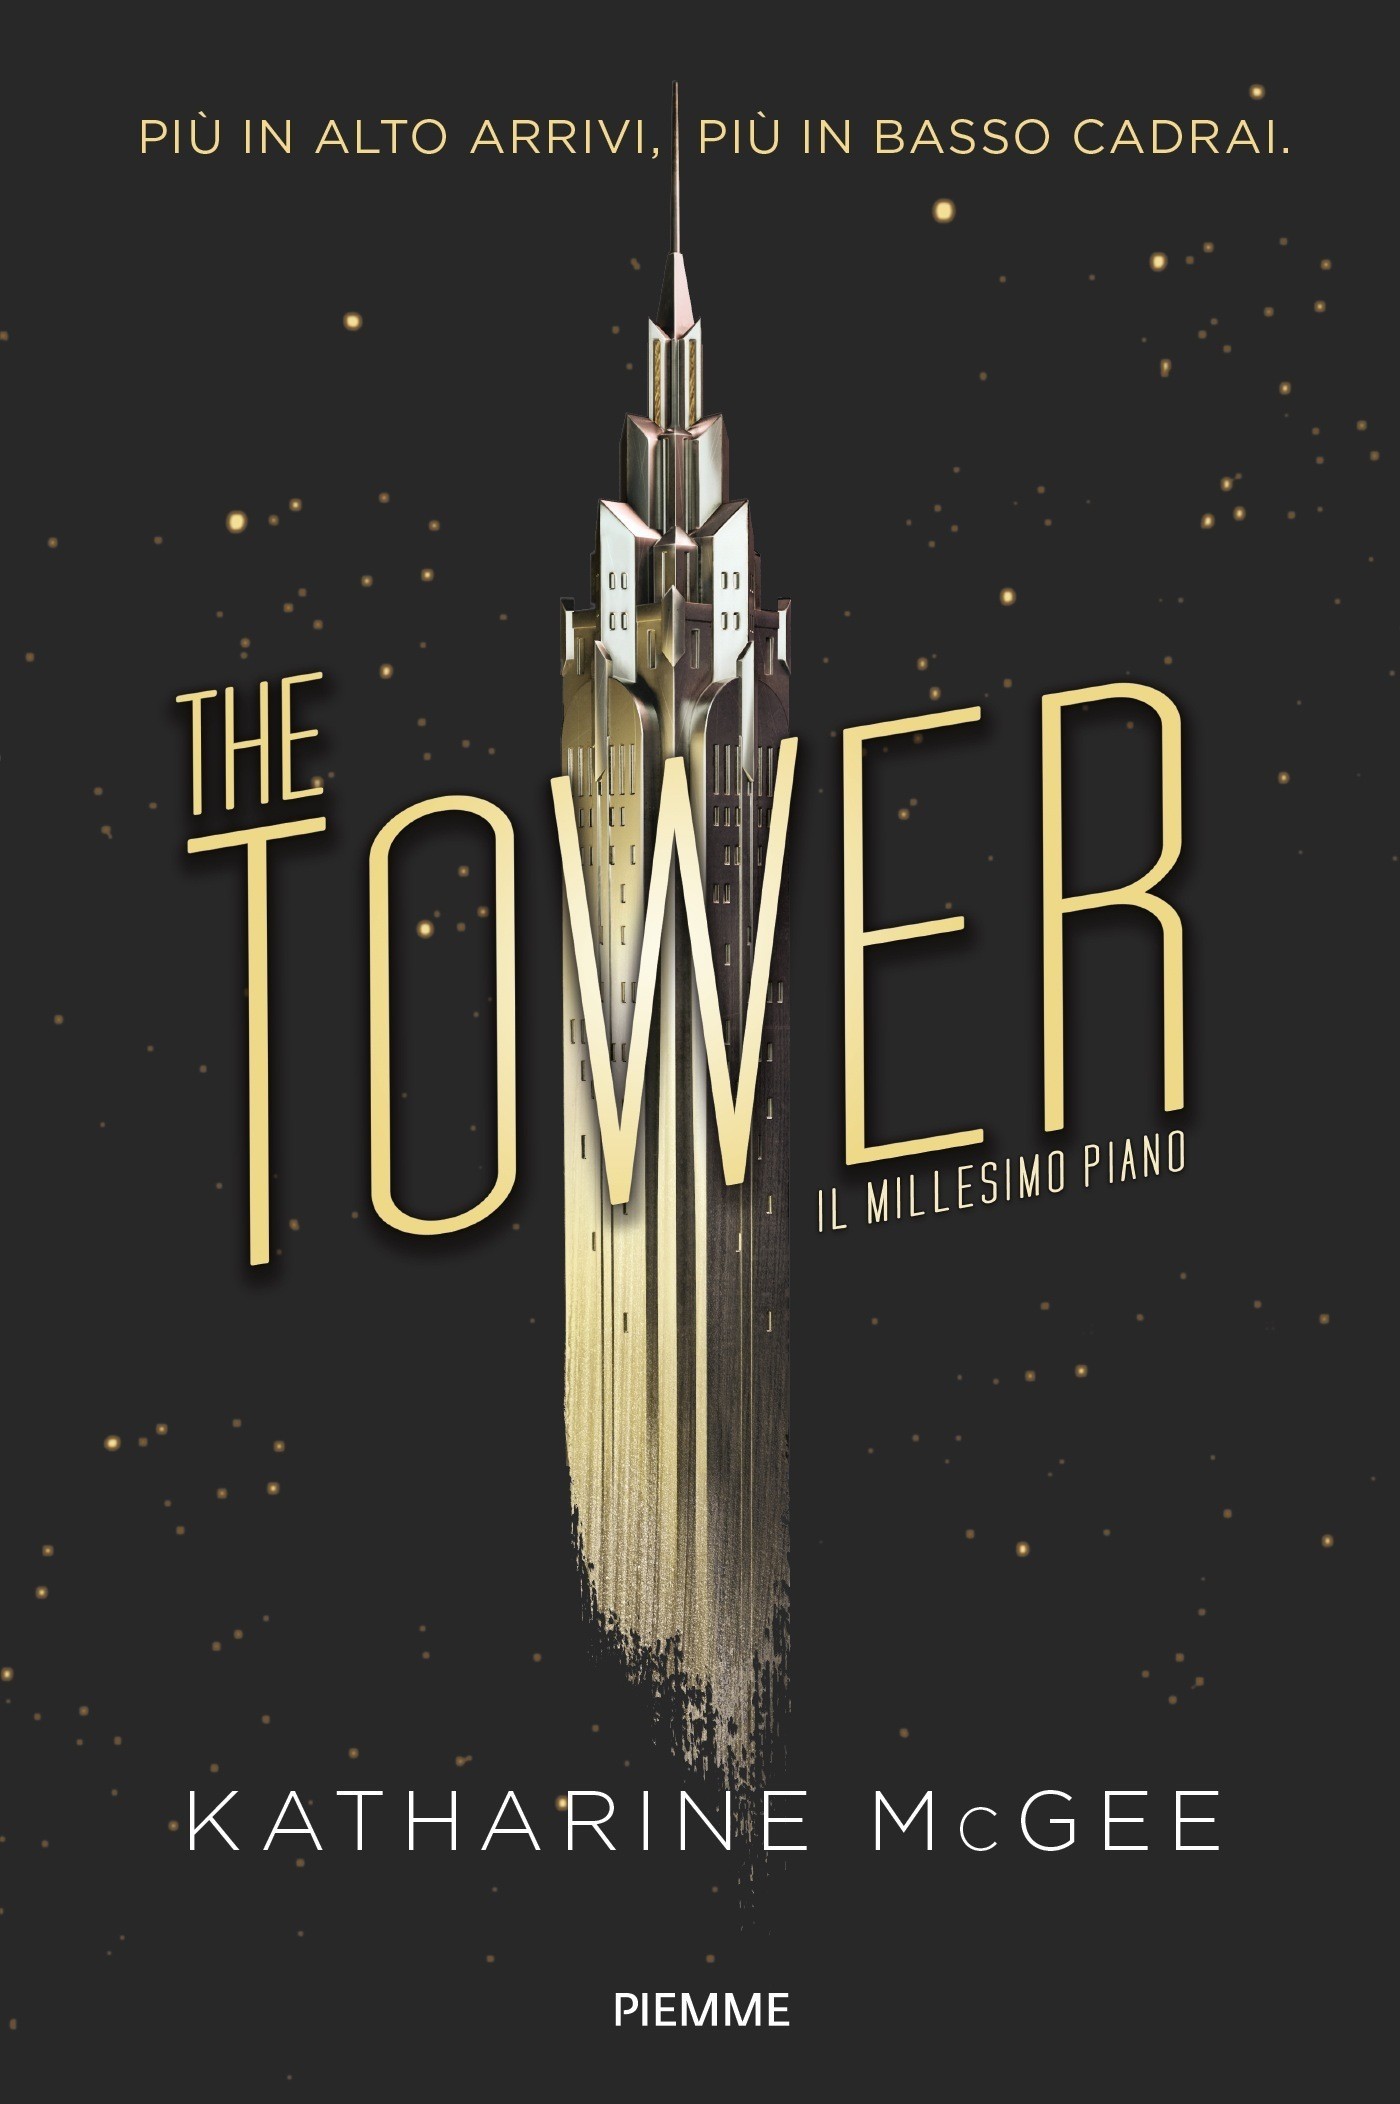 The Tower. Il millesimo piano - Librerie.coop